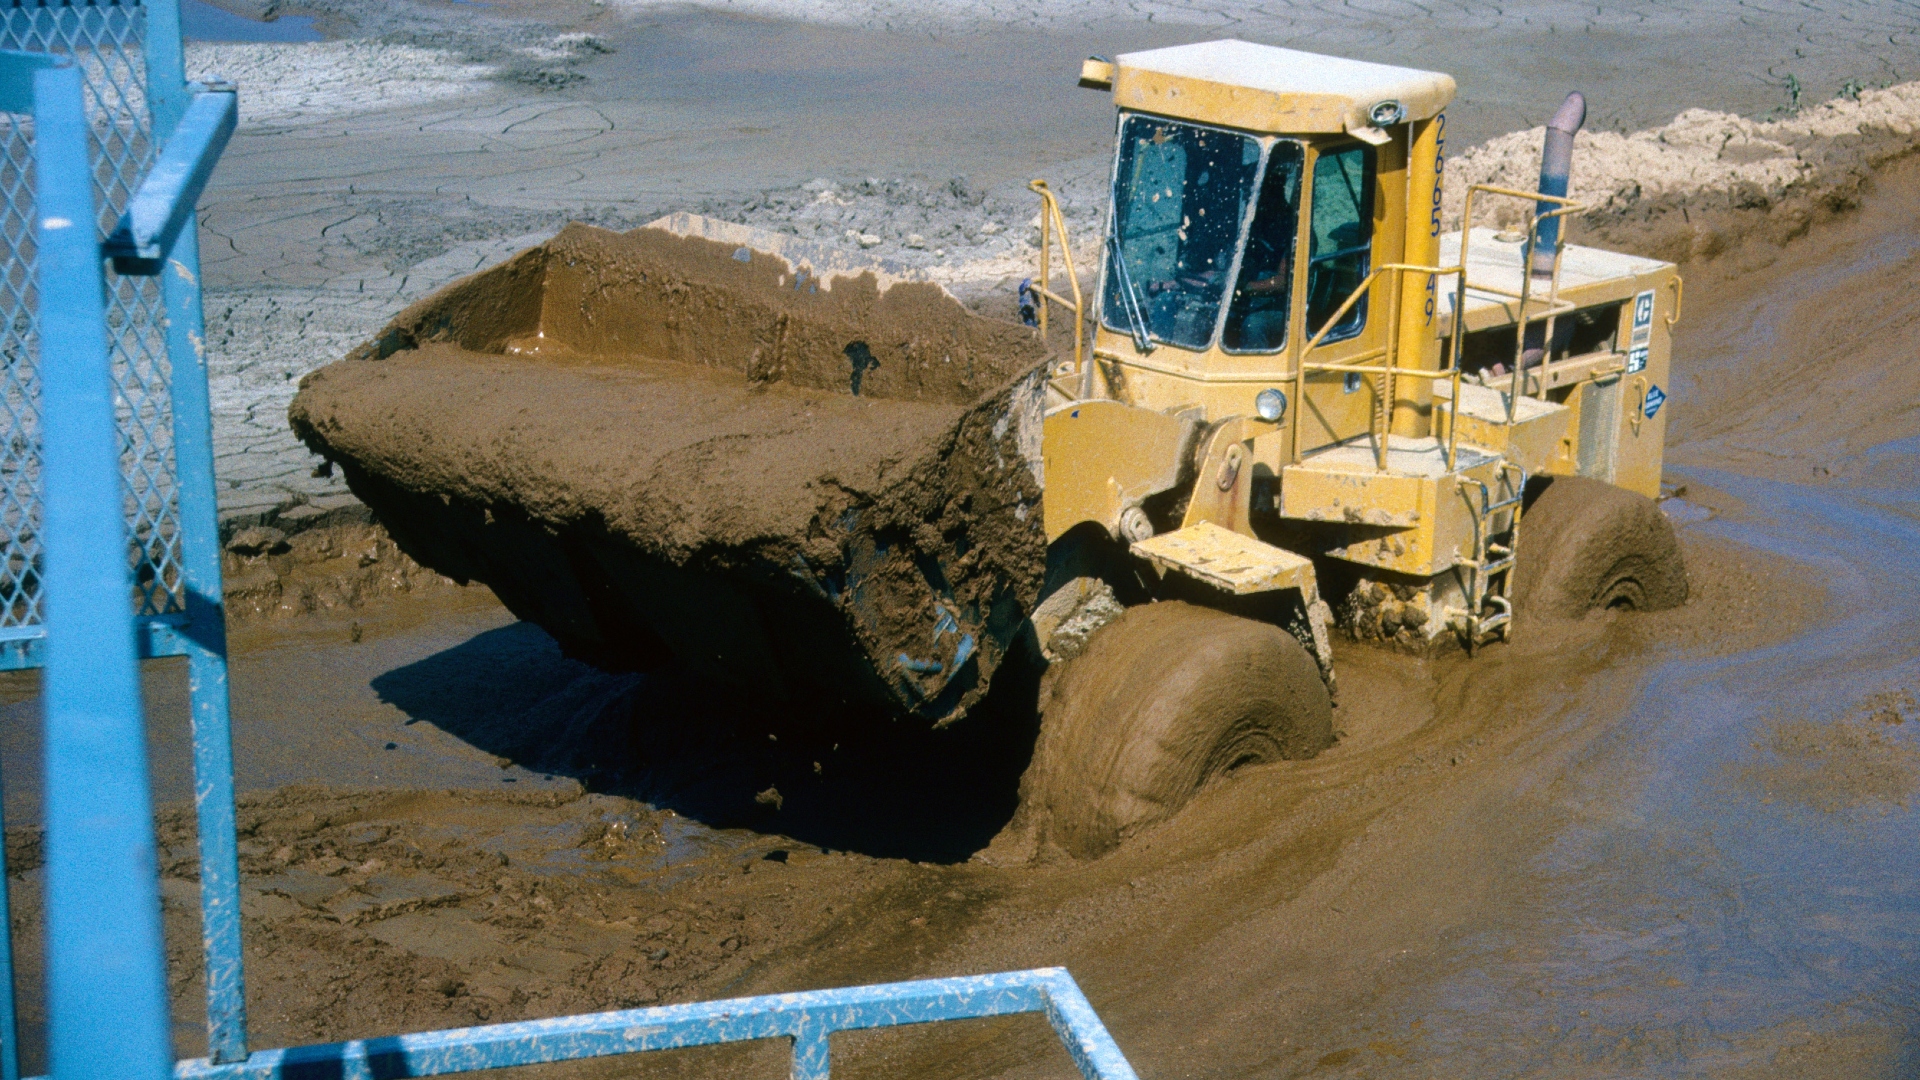 A front loader driving through a muddy settling pond with a watery bucket load.